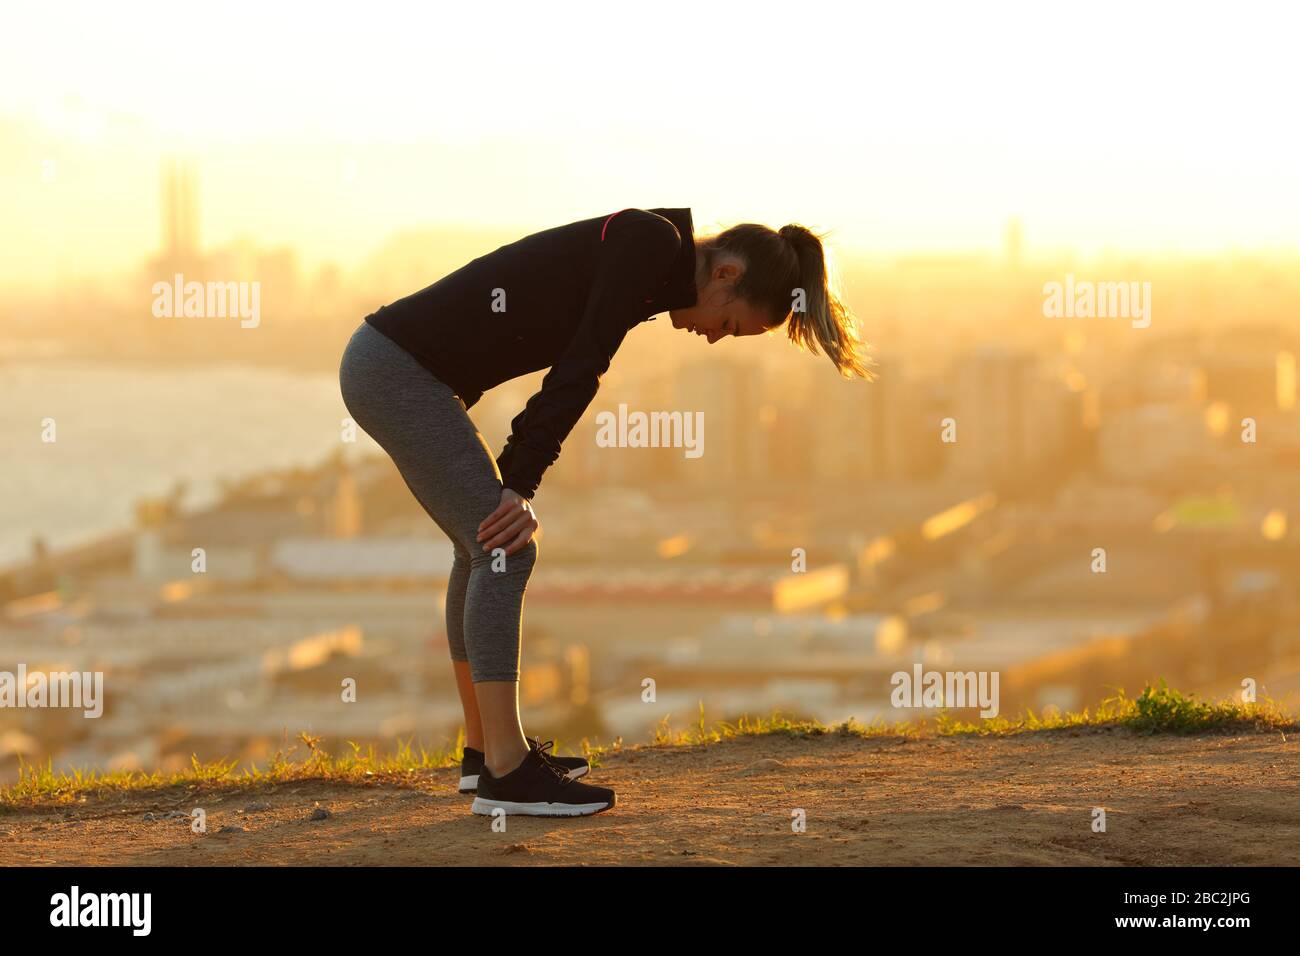 Profile of an exhausted runner resting after running in city outskirts at sunset Stock Photo